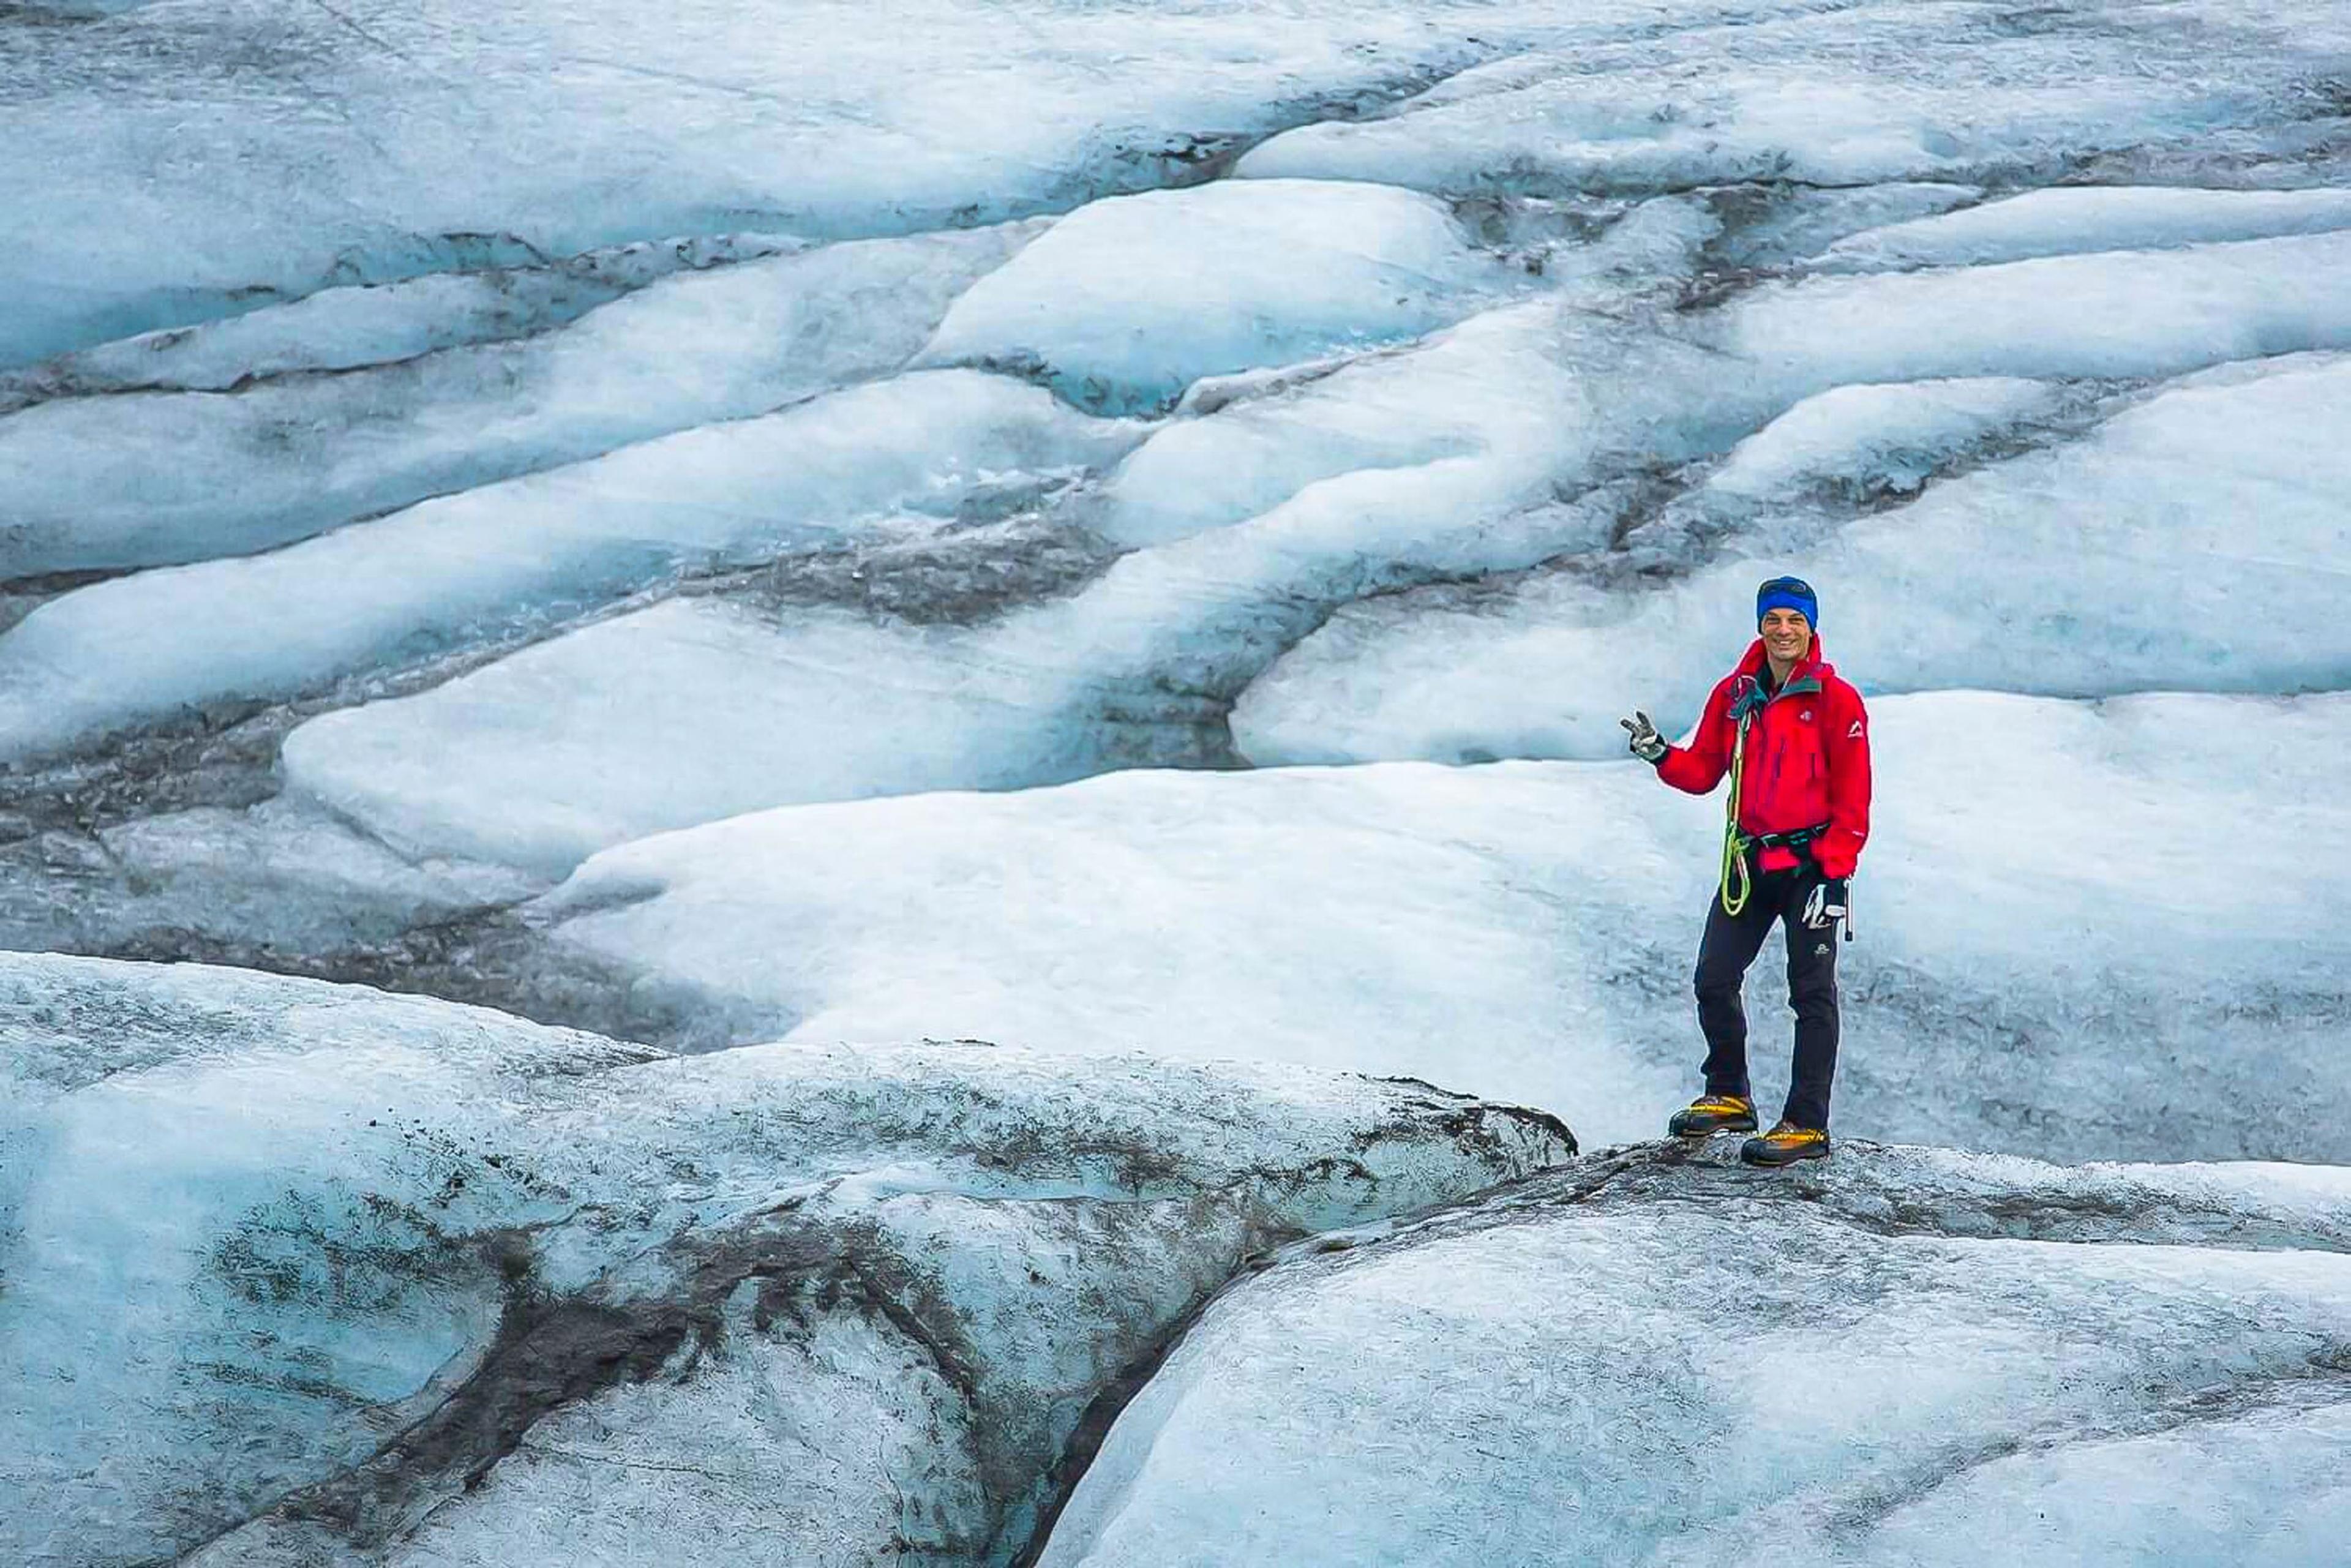 A lone hiker in red stands on the undulating, icy surface of a glacier, accentuating the vastness of the frozen landscape.